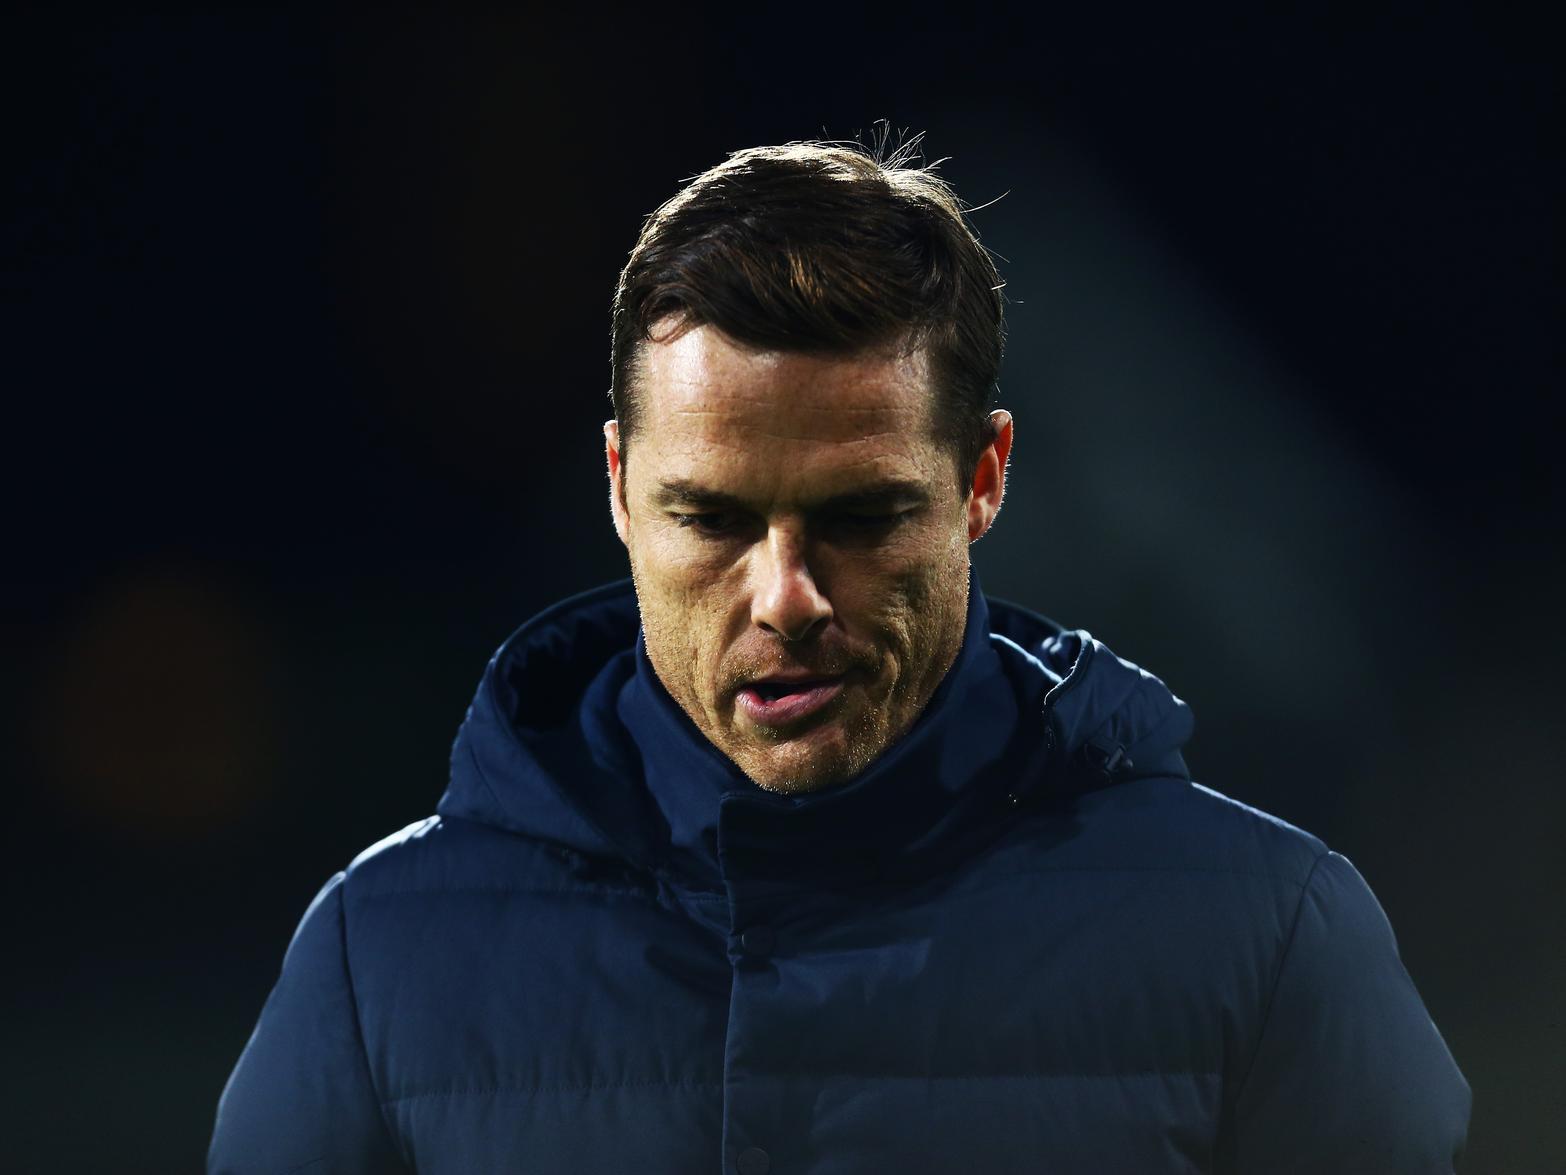 Position: 3rd. Points: 63. Points behind Leeds: 5. 
Average position of remaining opponents: 9th (hardest run in of top 11). 
Pictured - Fulham boss Scott Parker. Photo by Jordan Mansfield/Getty Images.